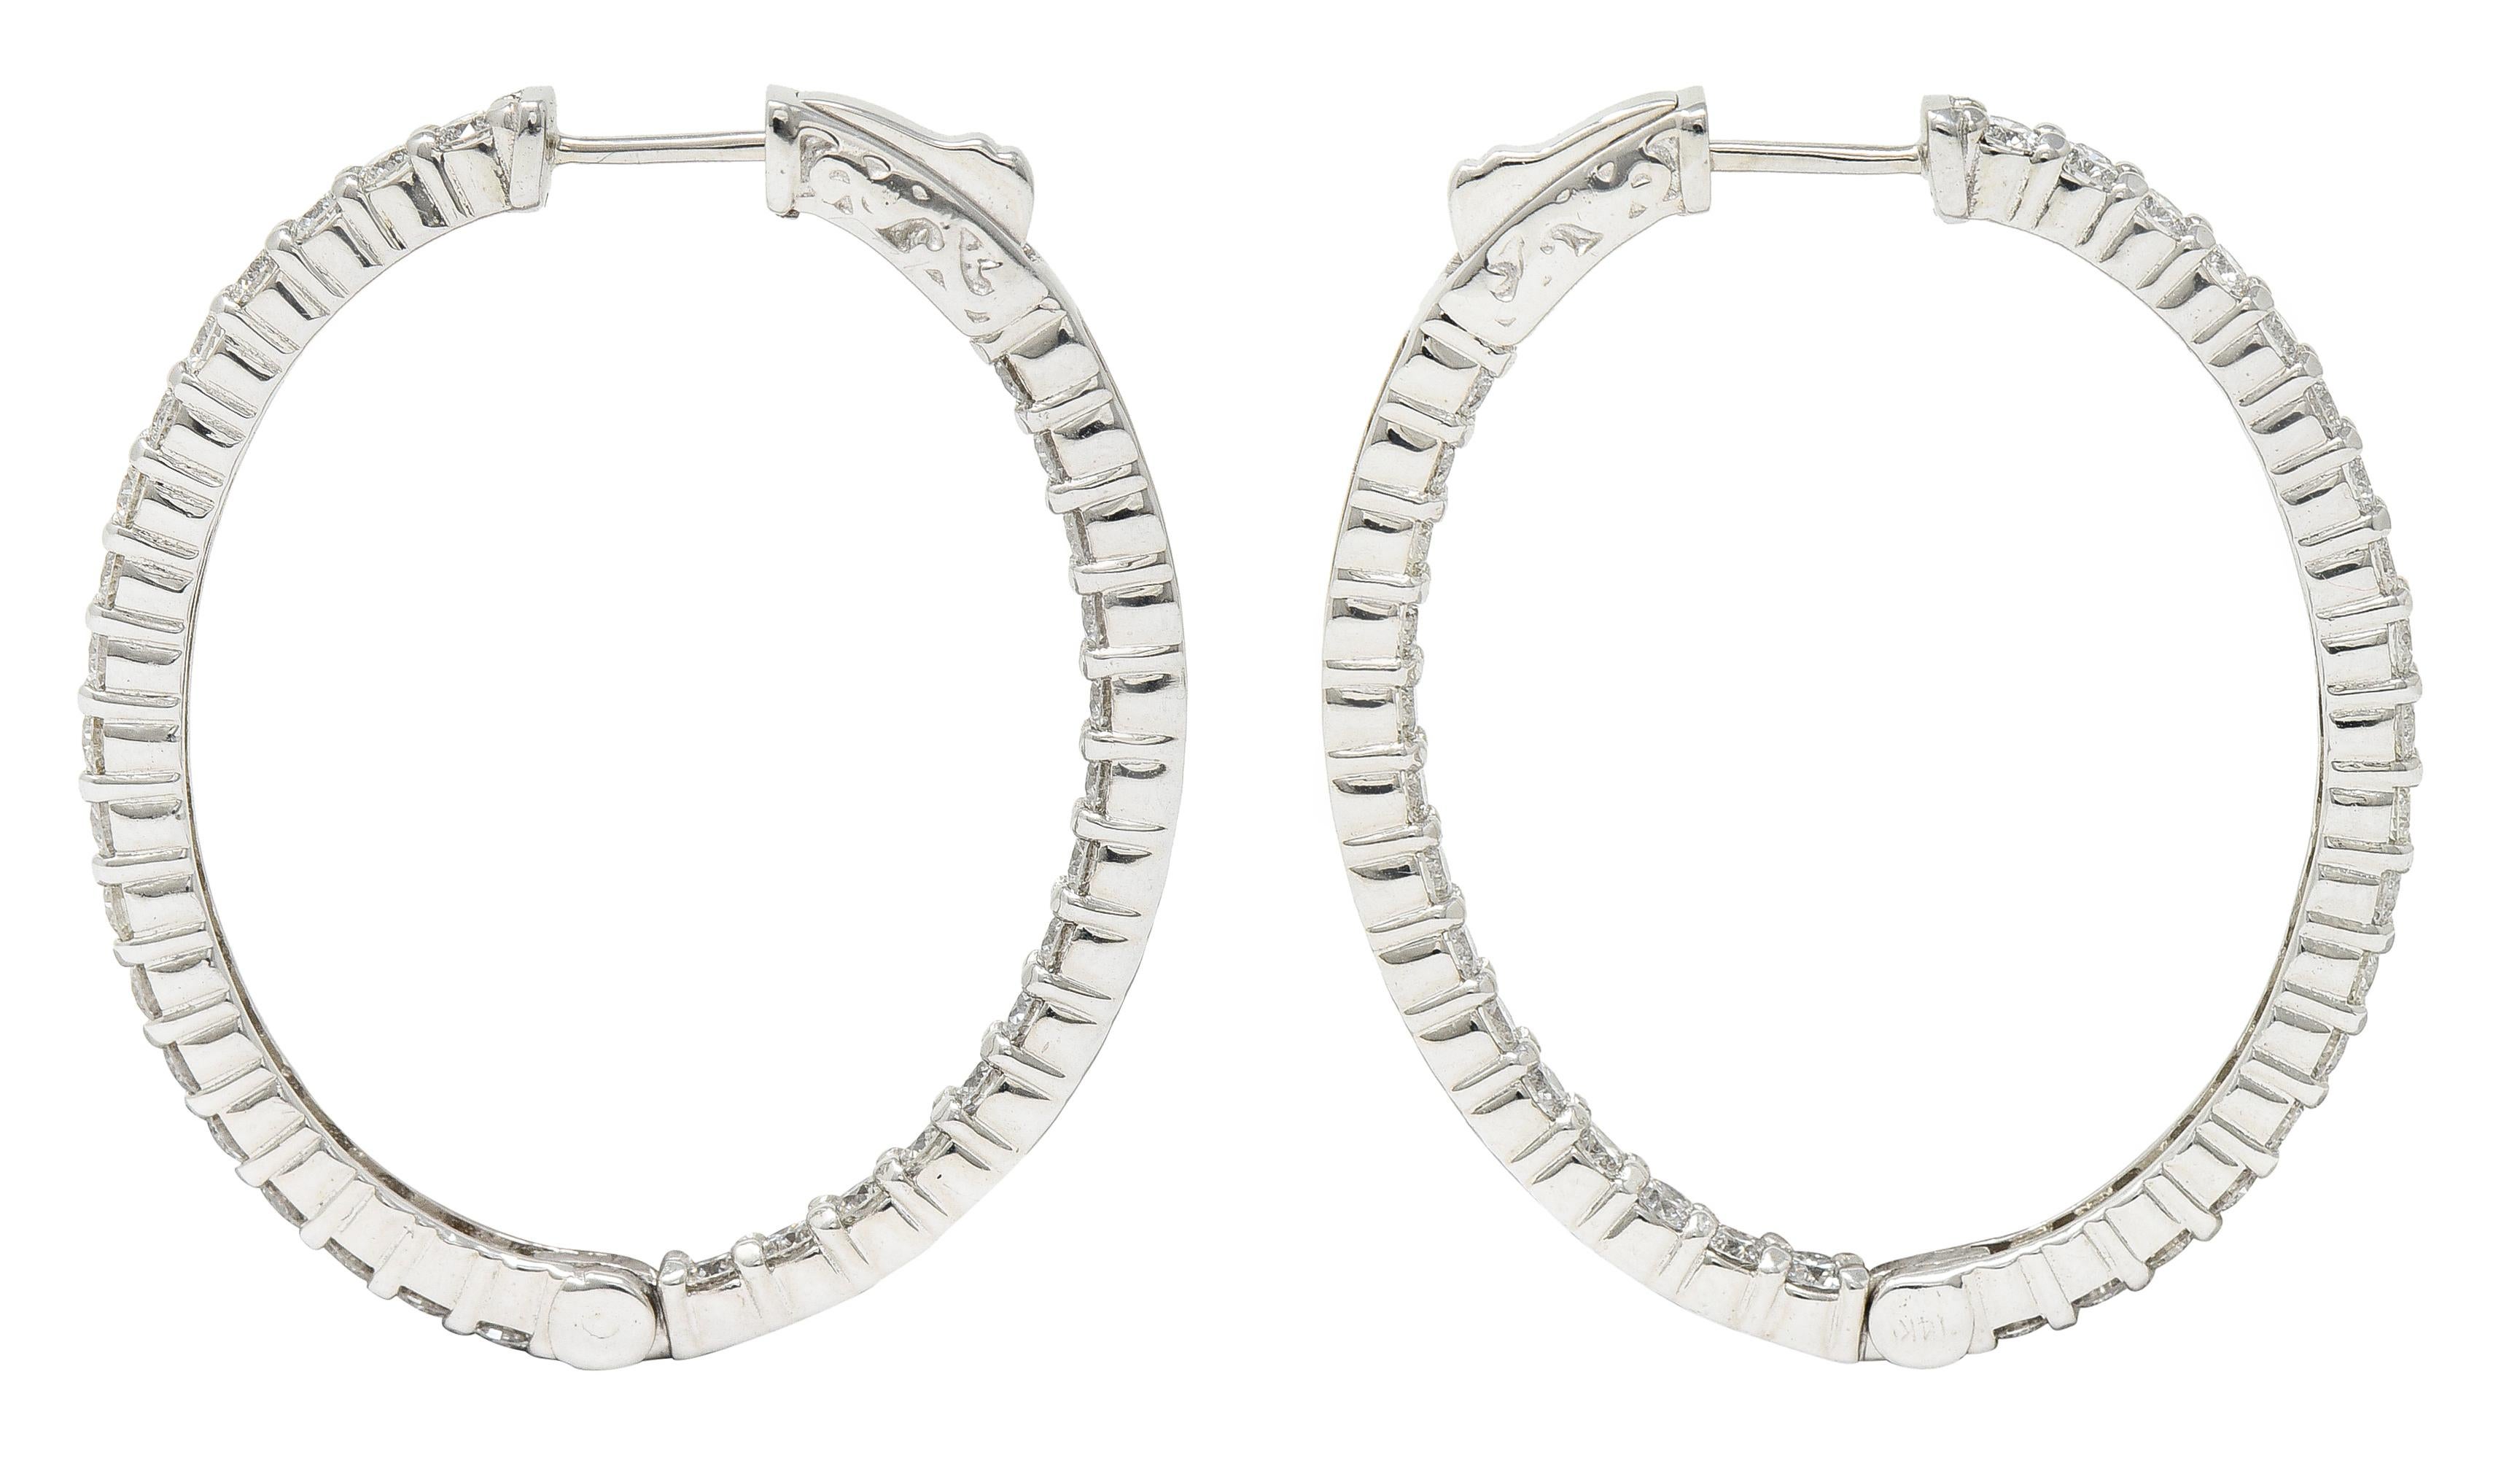 Inside/outside style oval shaped huggie hoop earrings

With round brilliant cut diamonds in shared prongs

Weighing in total approximately 3.00 carats - G/H color with overall VS clarity

Opens on a hinge via presser revealing posts

Inscribed with